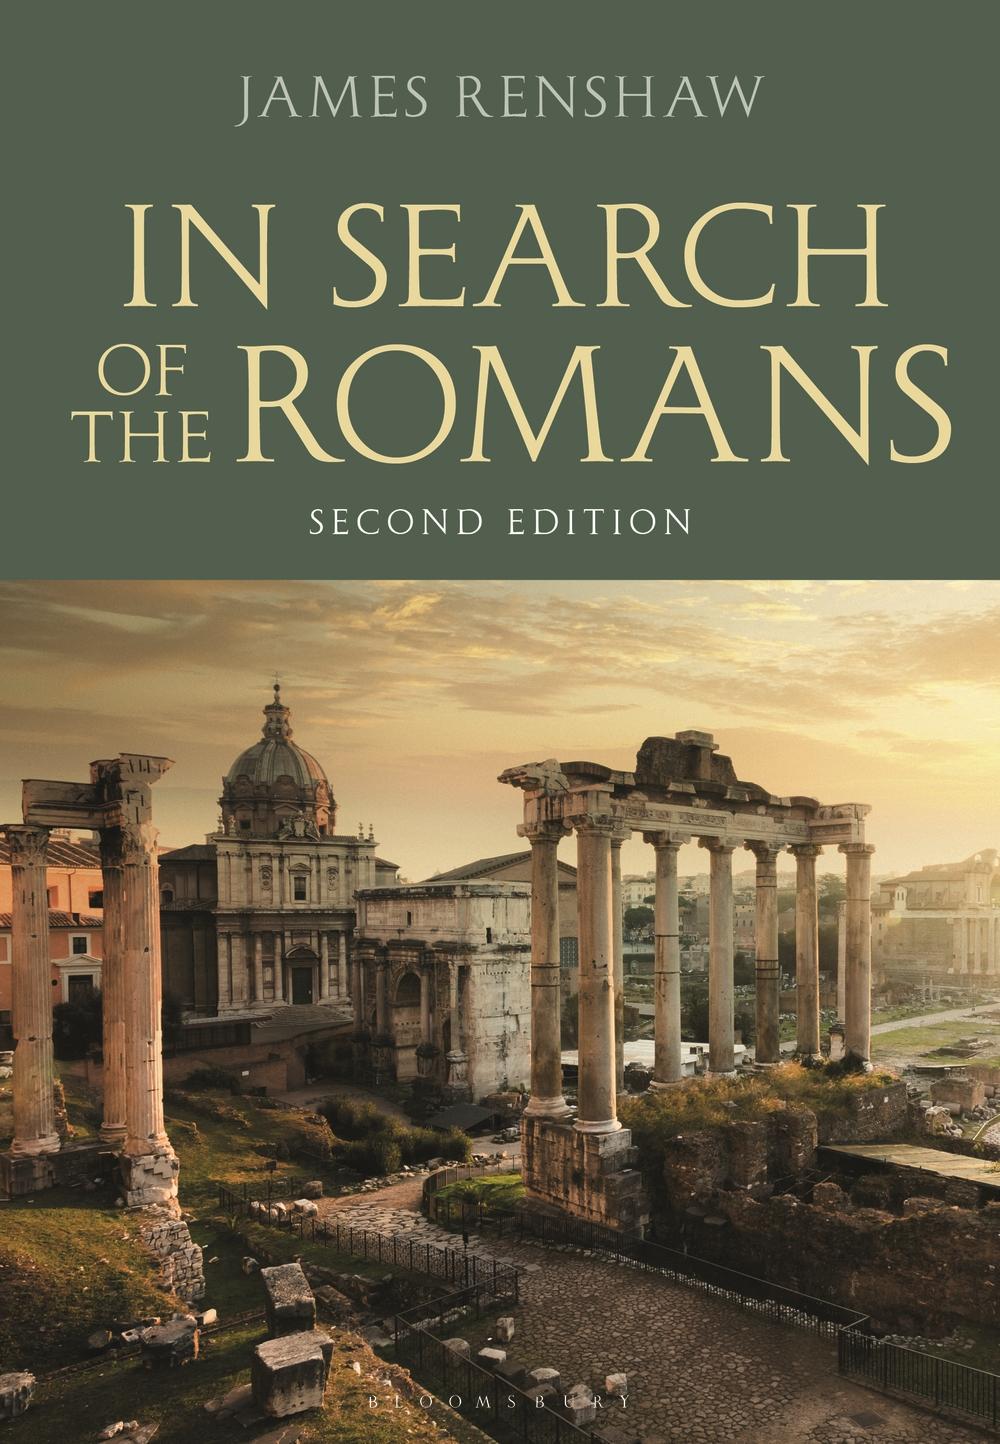 In Search of the Romans (Second Edition) - James Renshaw